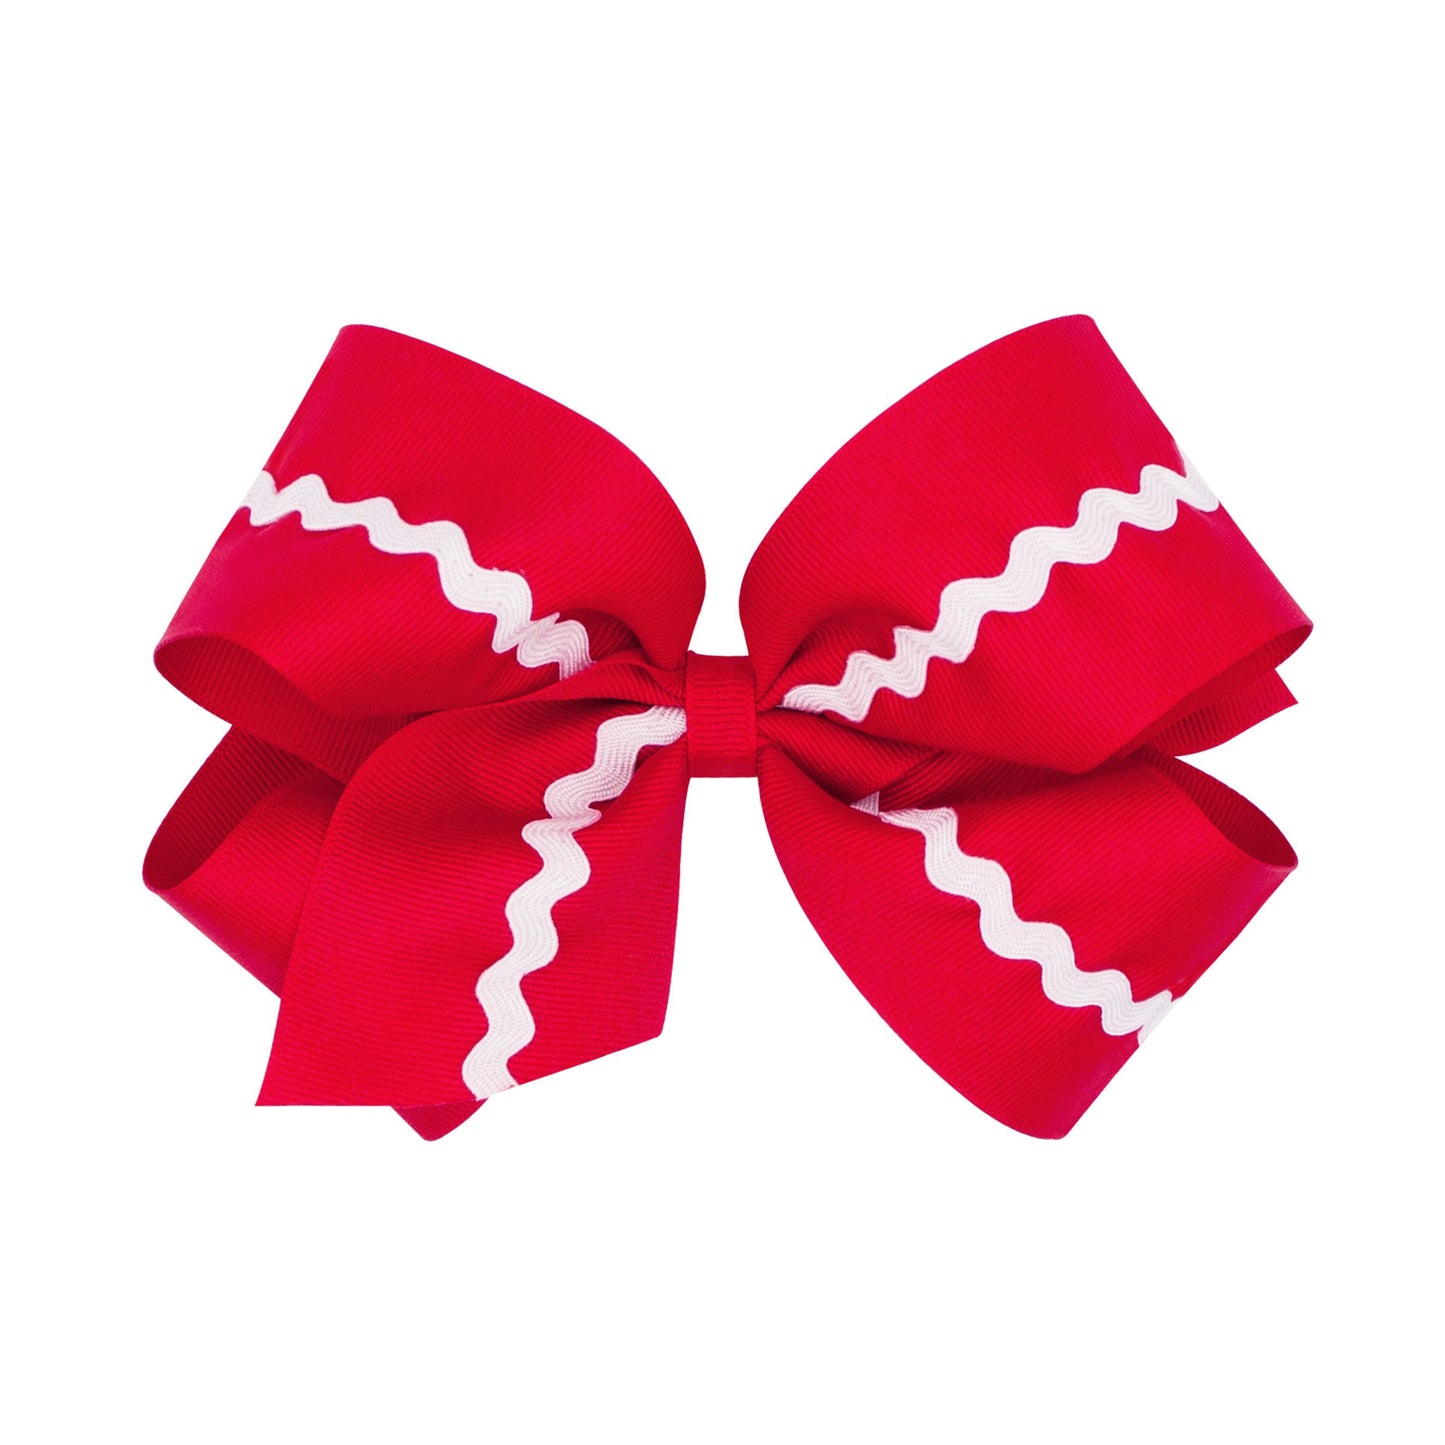 Wee Ones Red Ric Rac Hair Bow